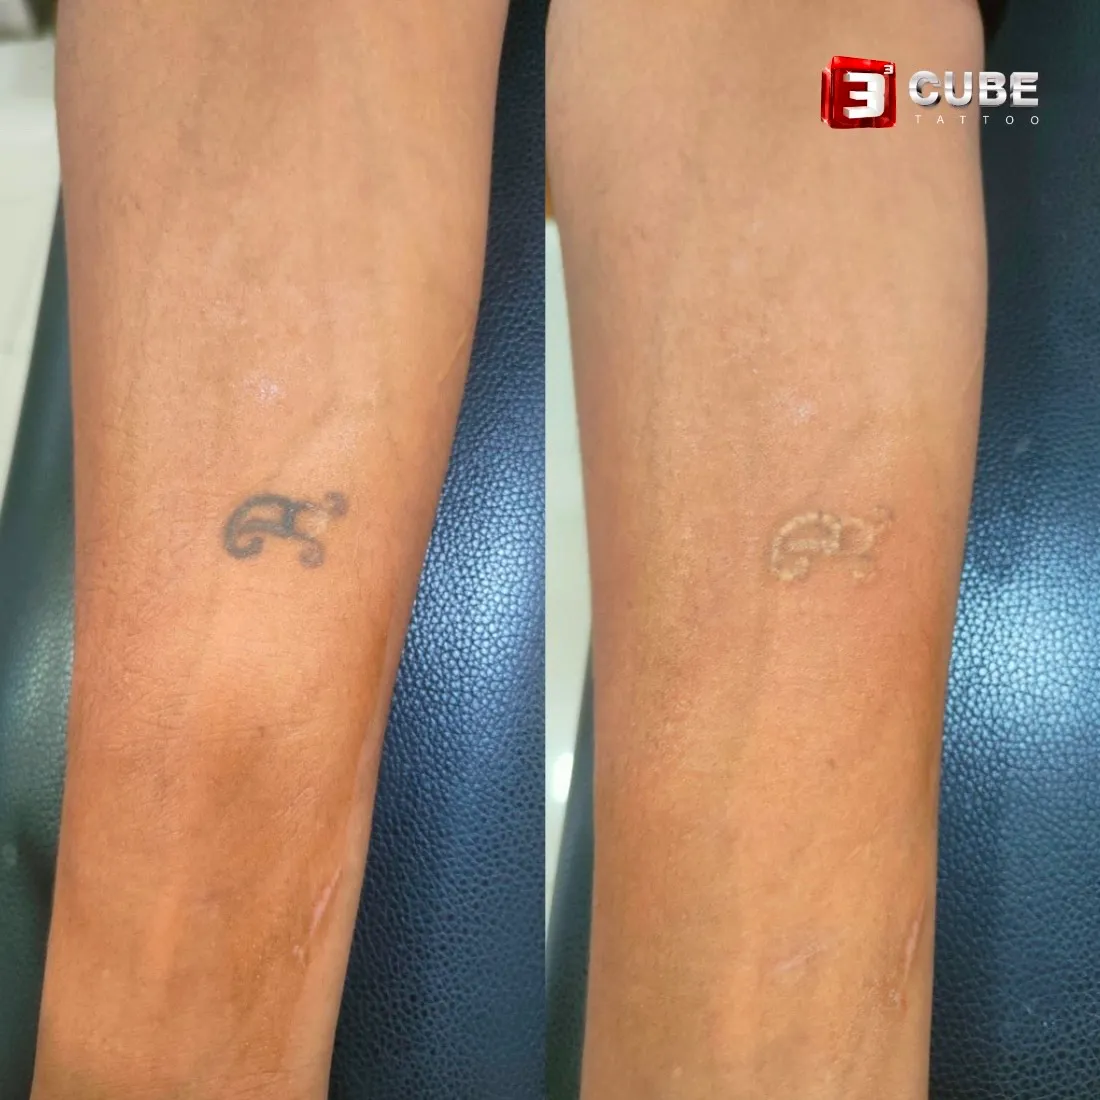 Laser Tattoo Removal Healing Process | Fairview Laser Clinic Inc.